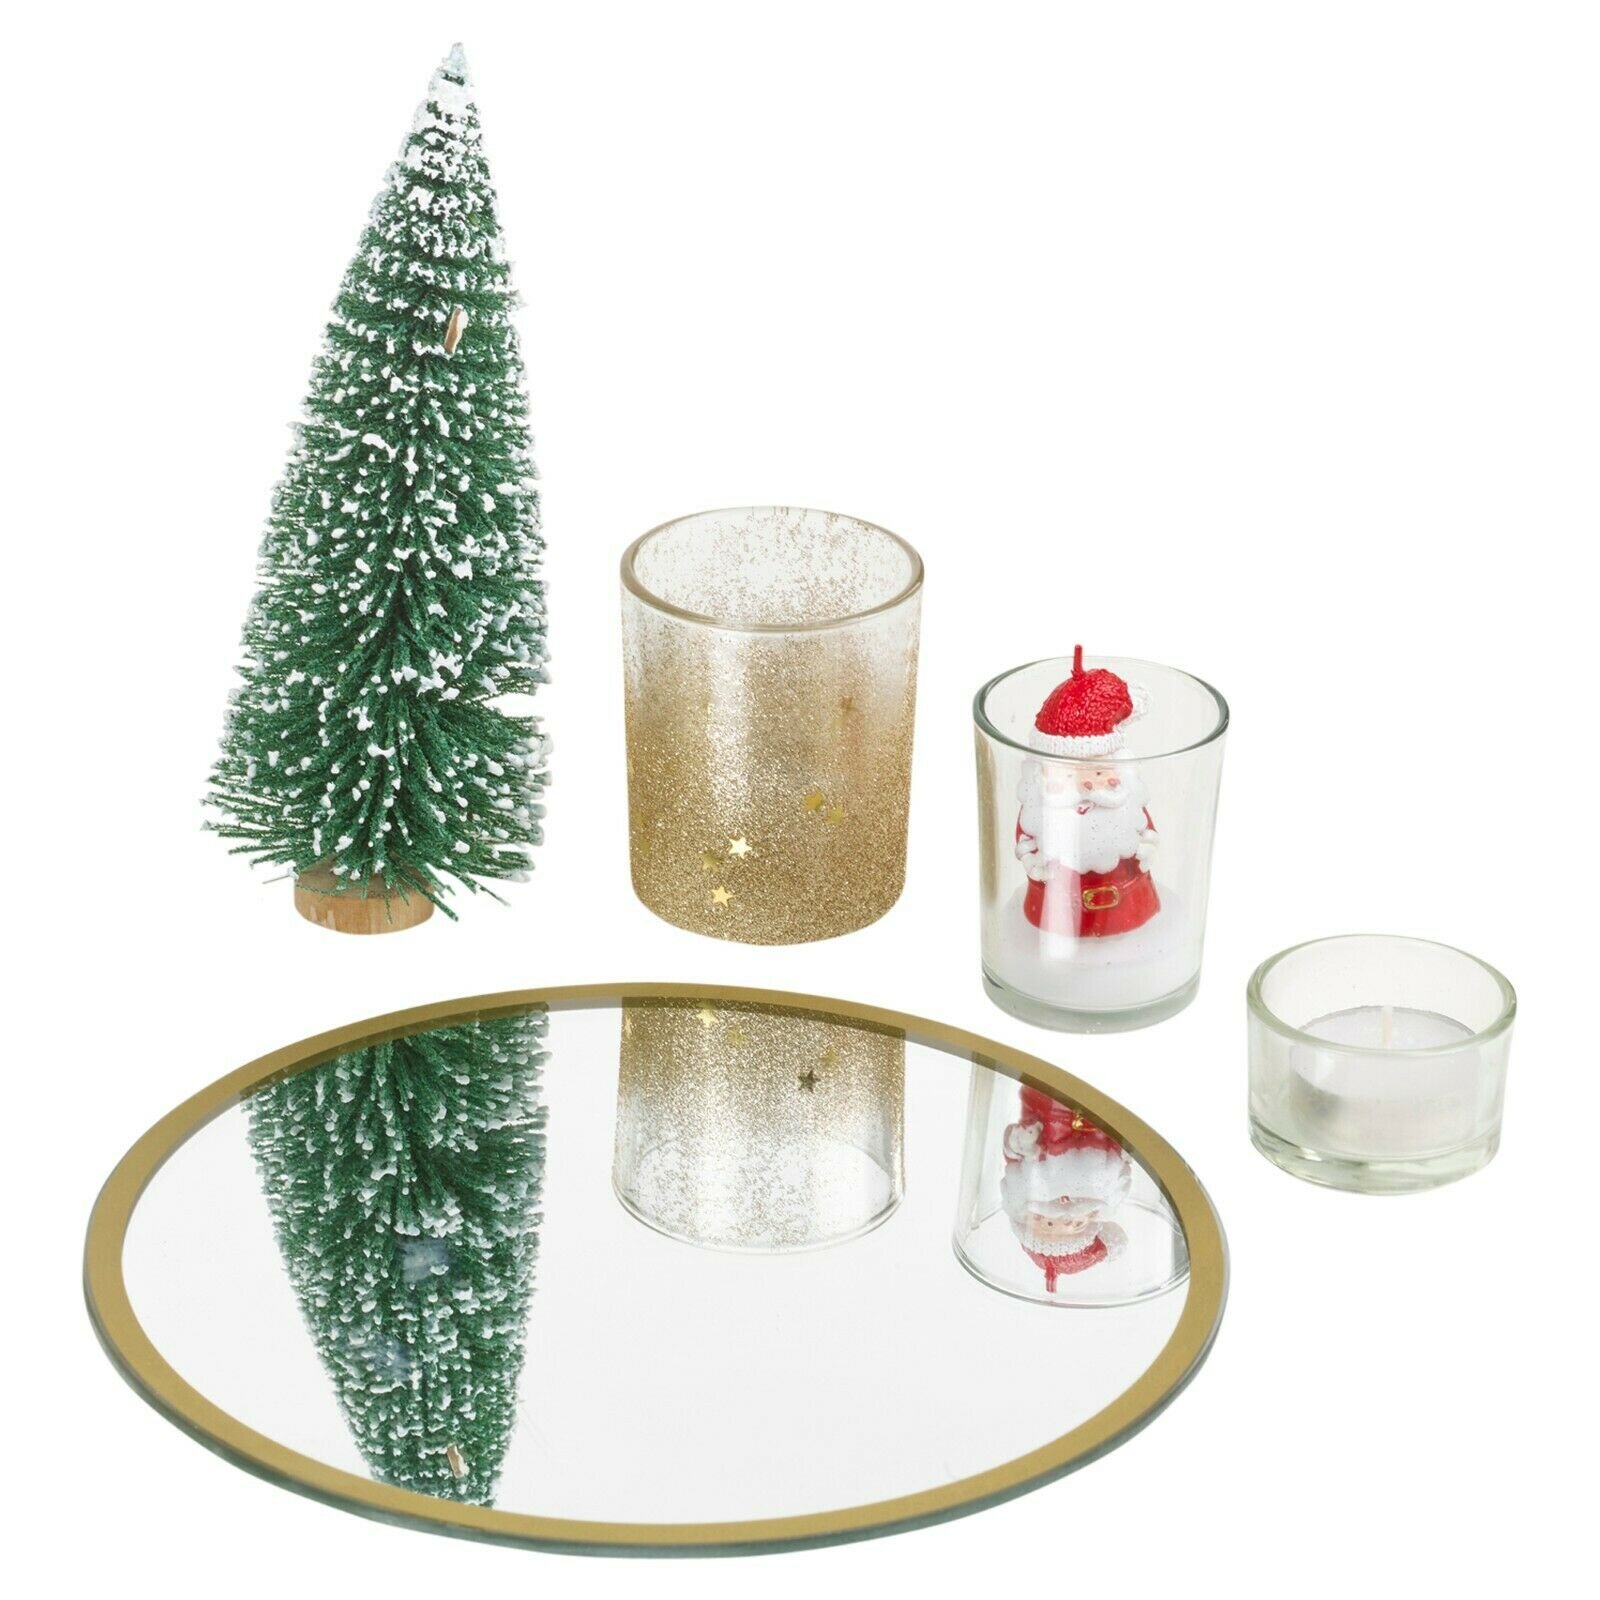 URBNLIVING 7Pc Christmas Candle Gift Set With Tray and Christmas Tree 